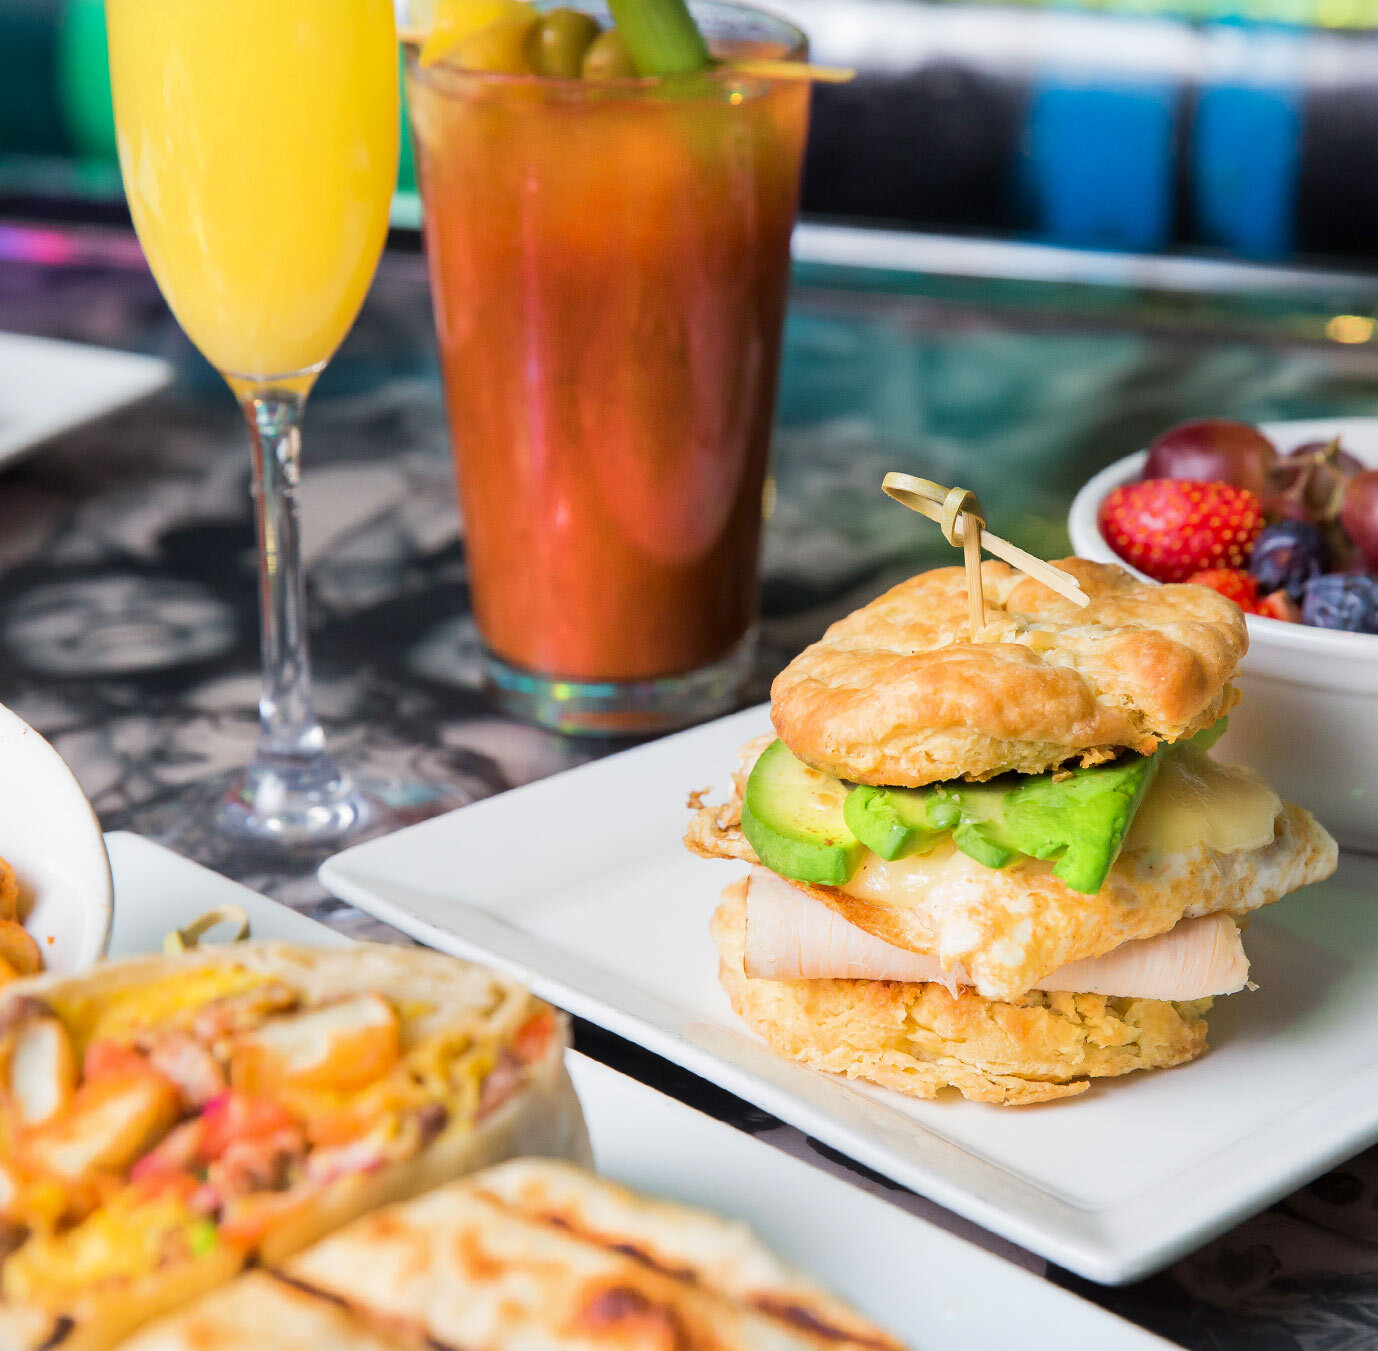 Assortment of Brunch food with Mimosa and Bloody Mary